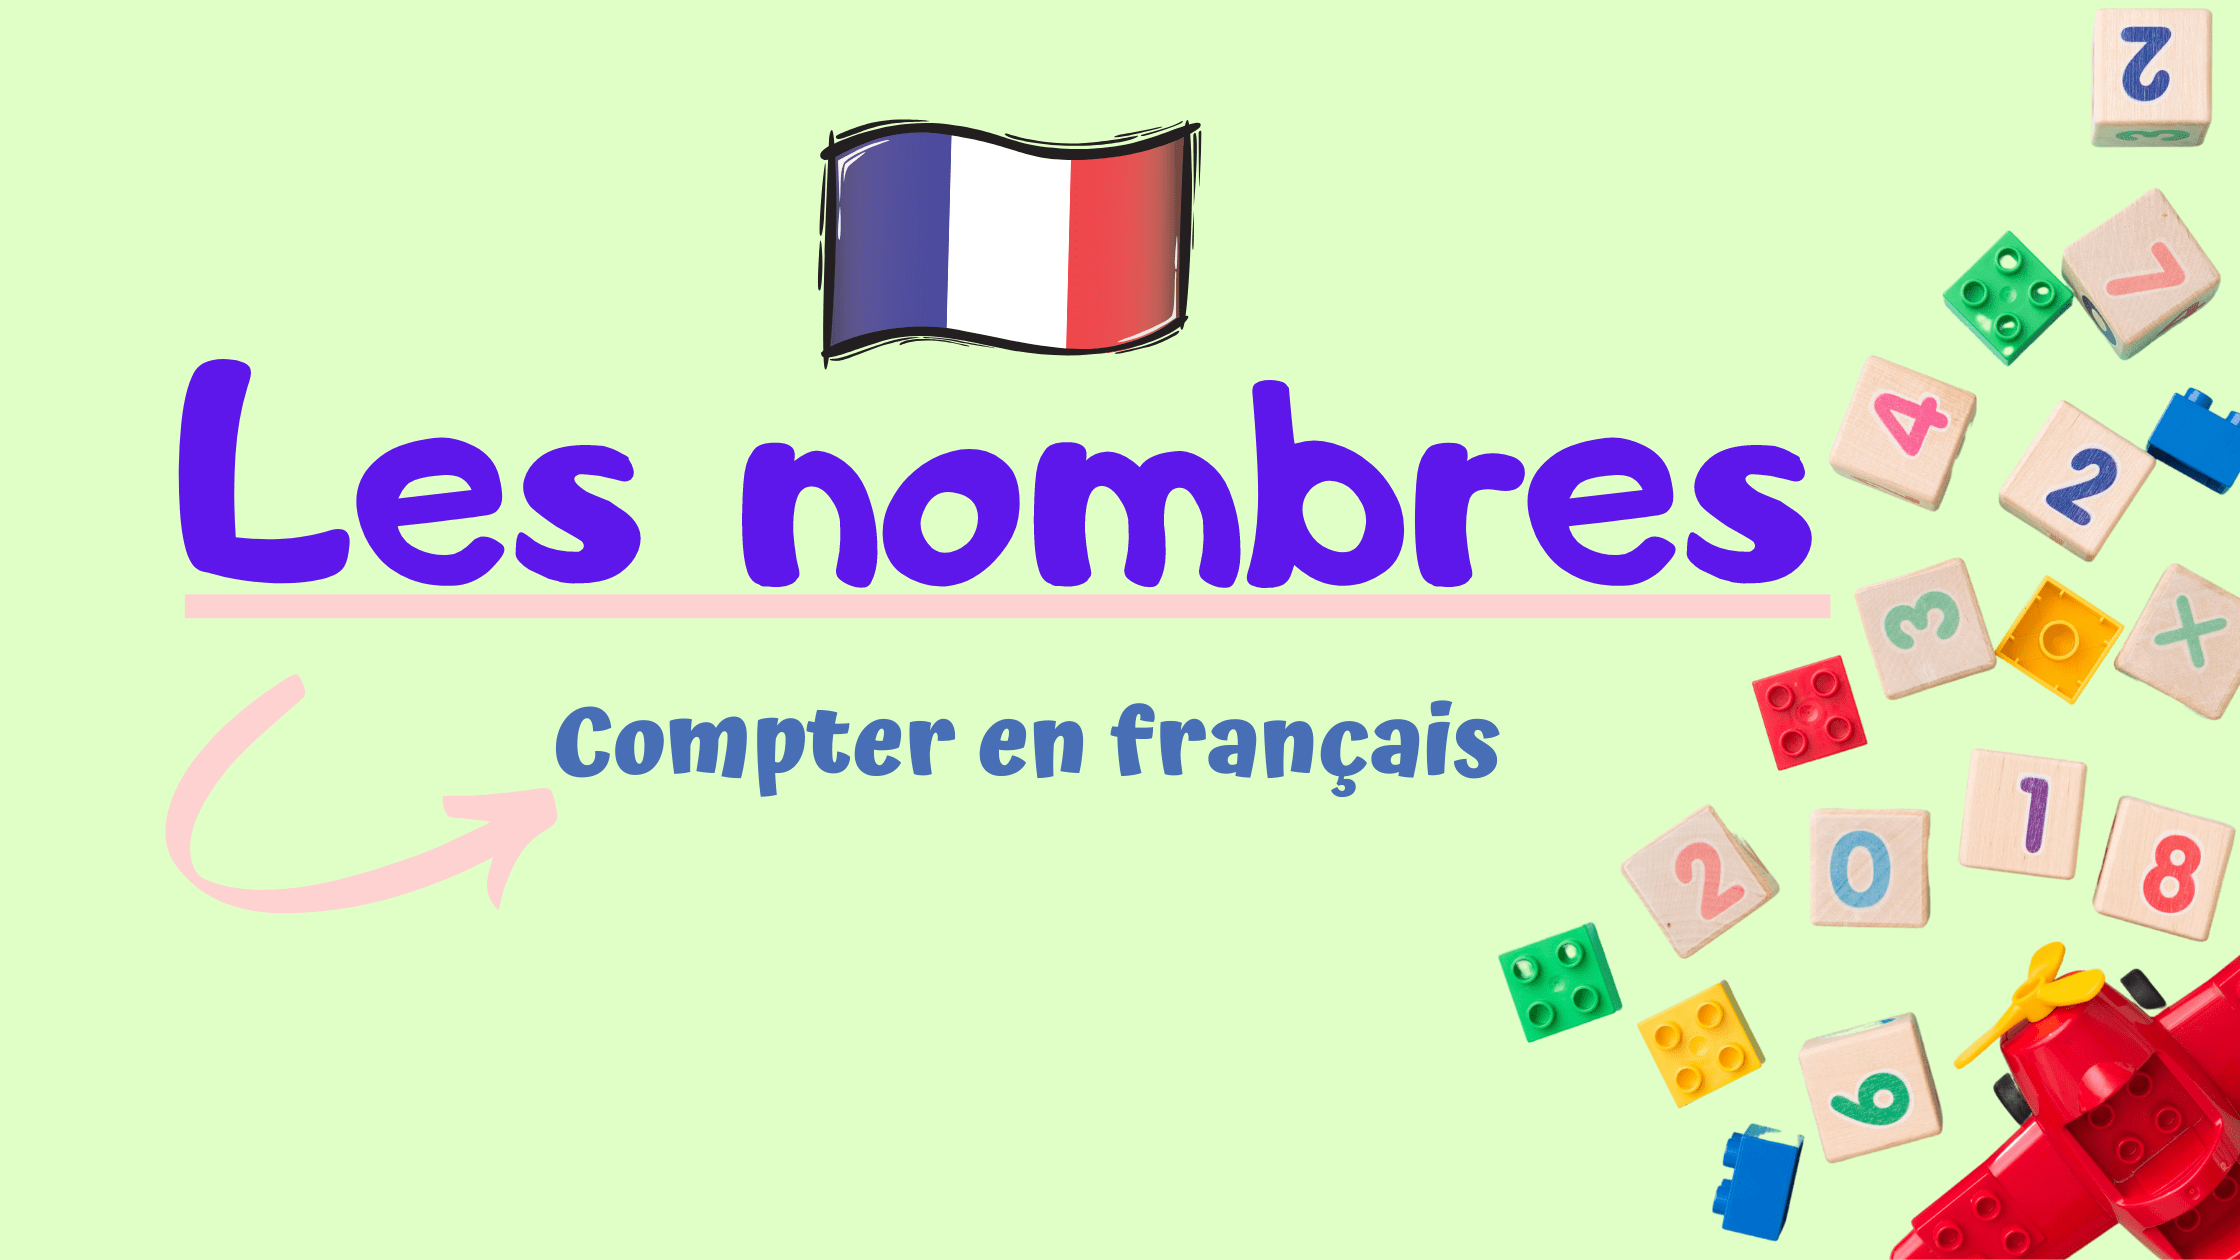 Numbers from 1 to 10 in French